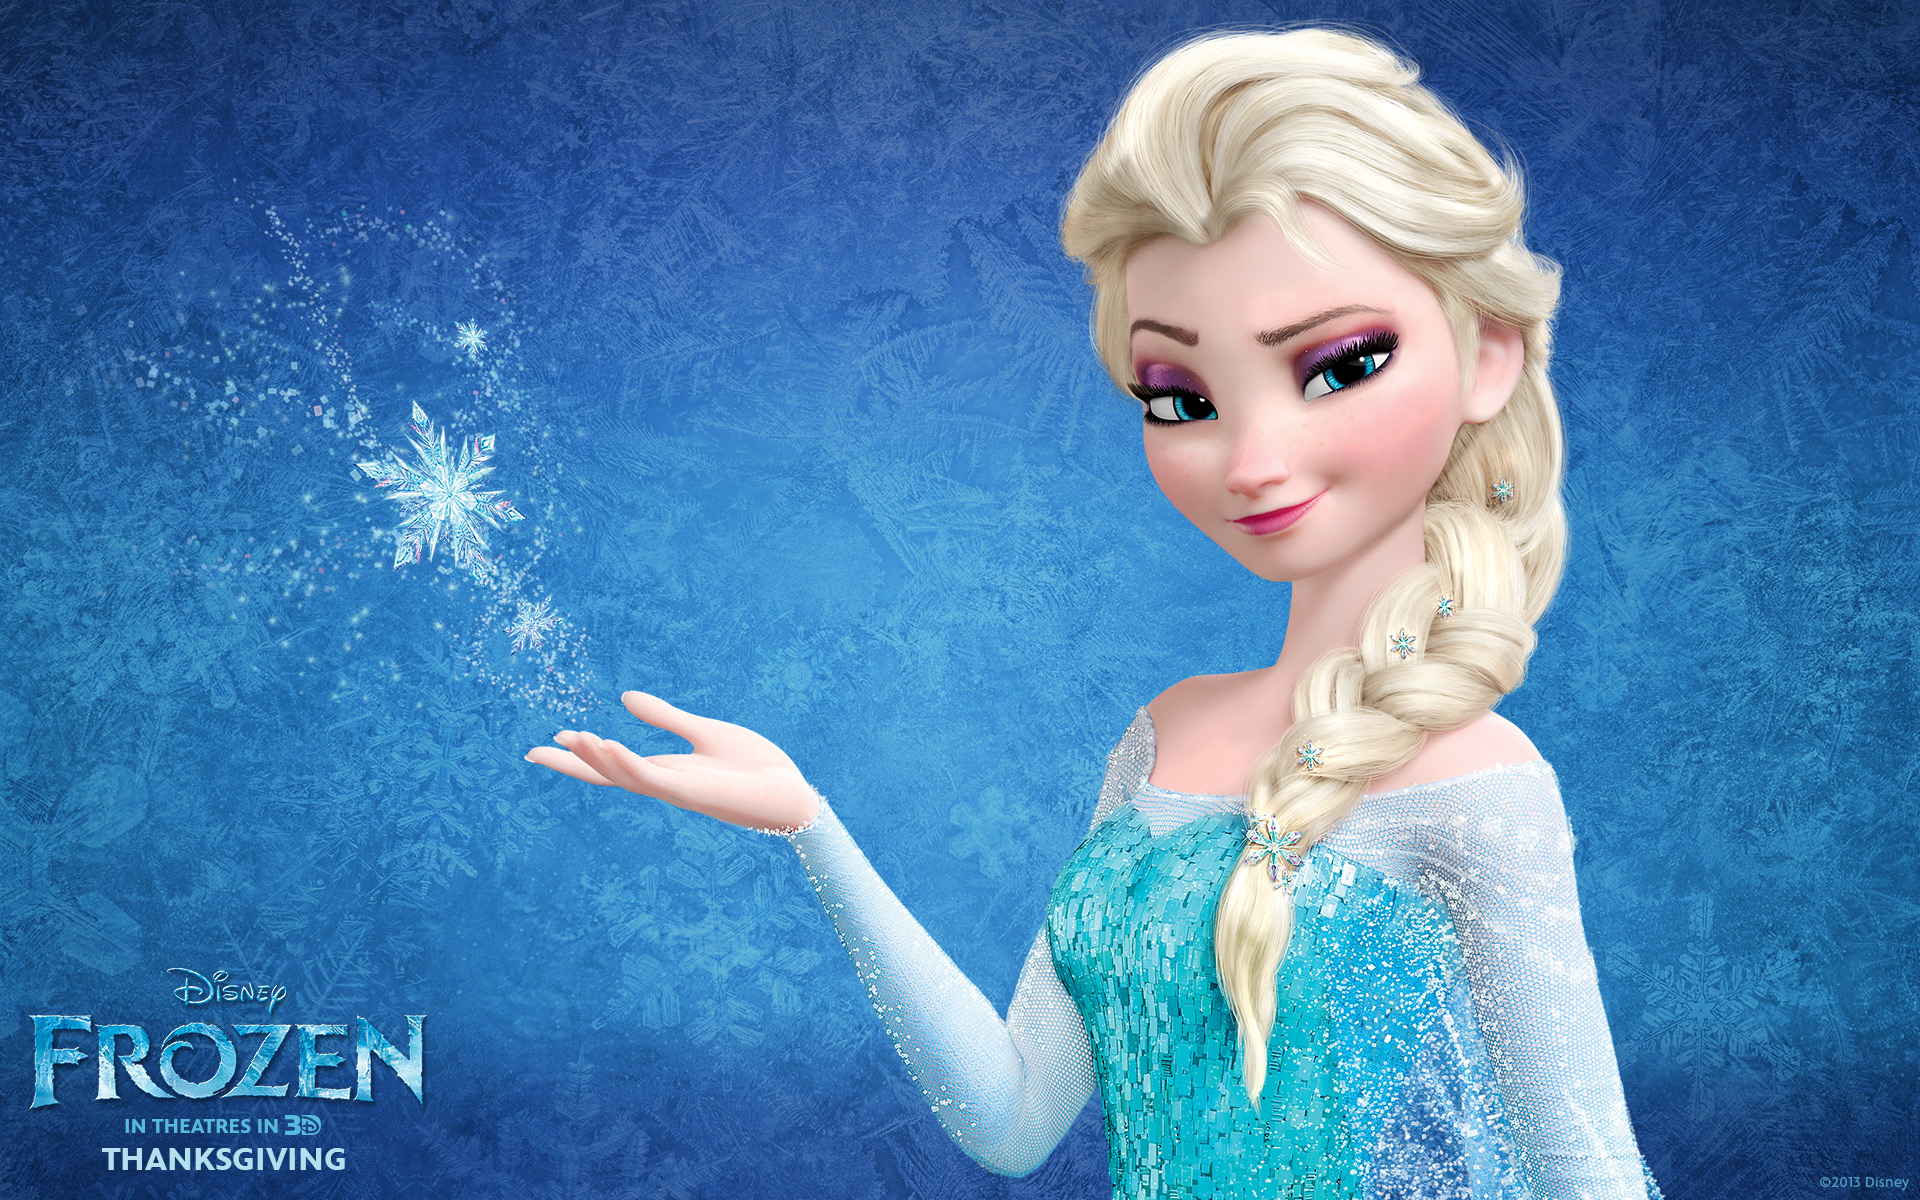 Thoughts On: “Frozen” | Jamie Lee